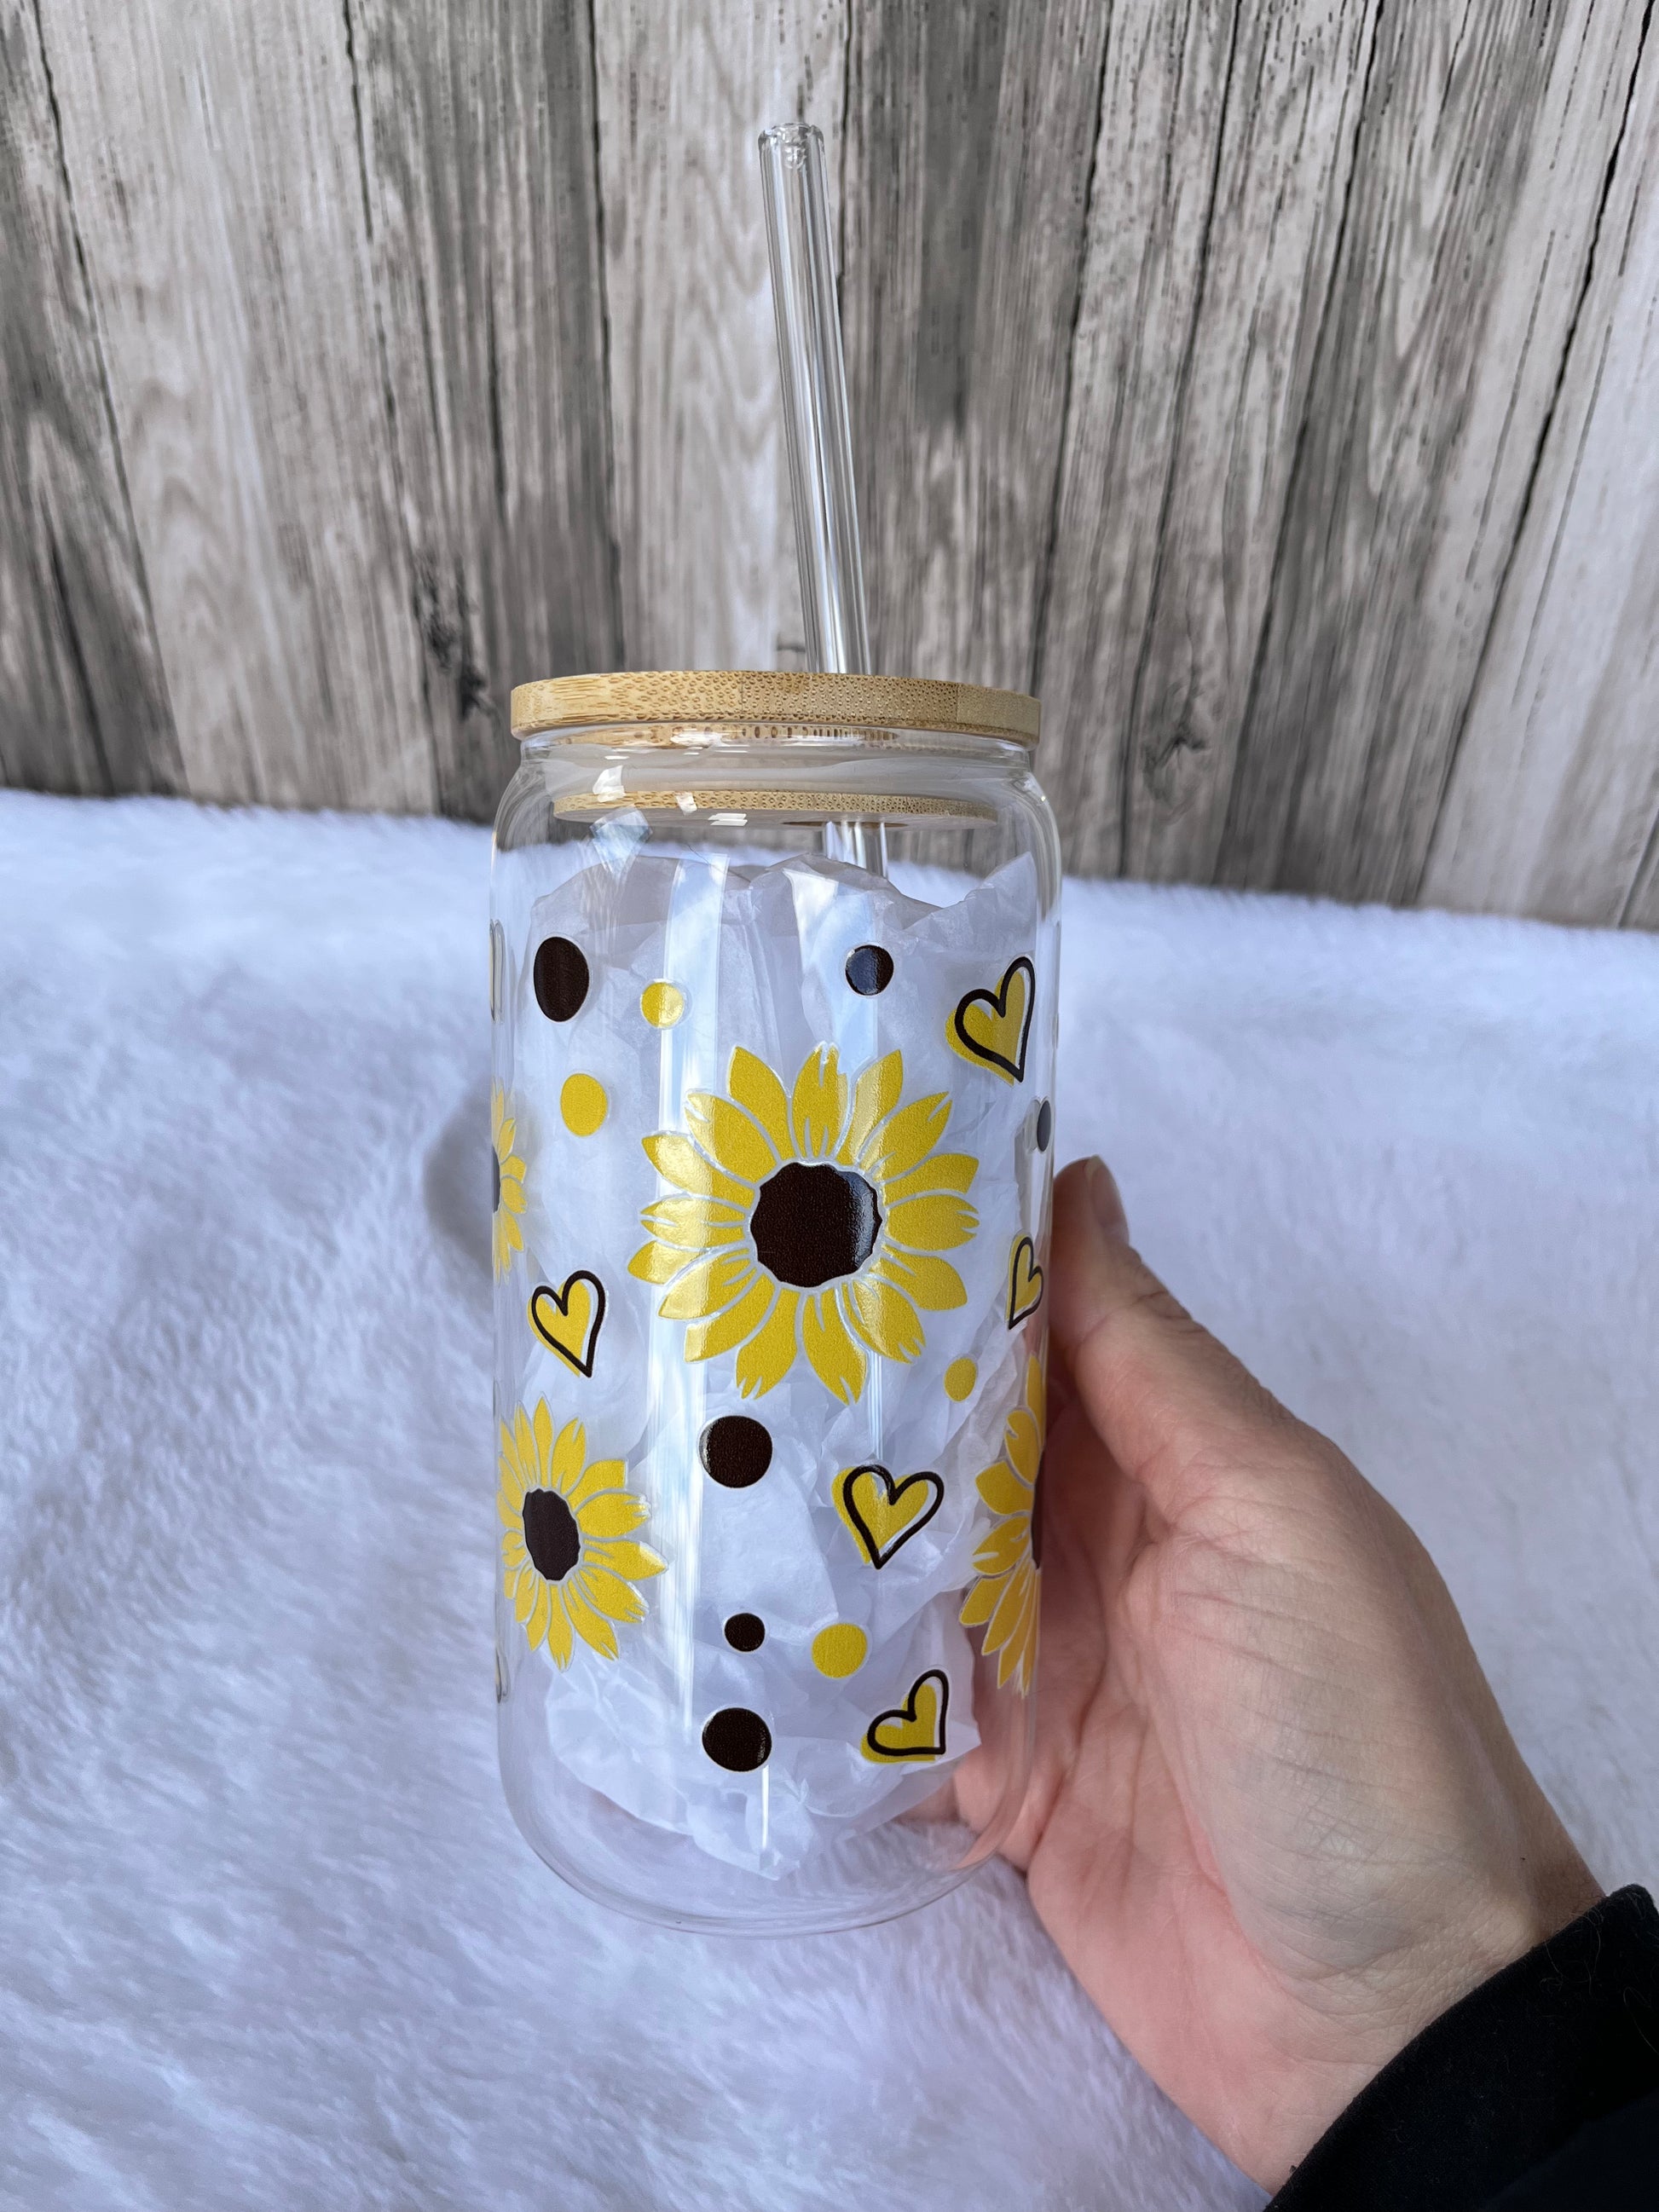 Sunflower 16 oz Glass Cup with Bamboo Lid